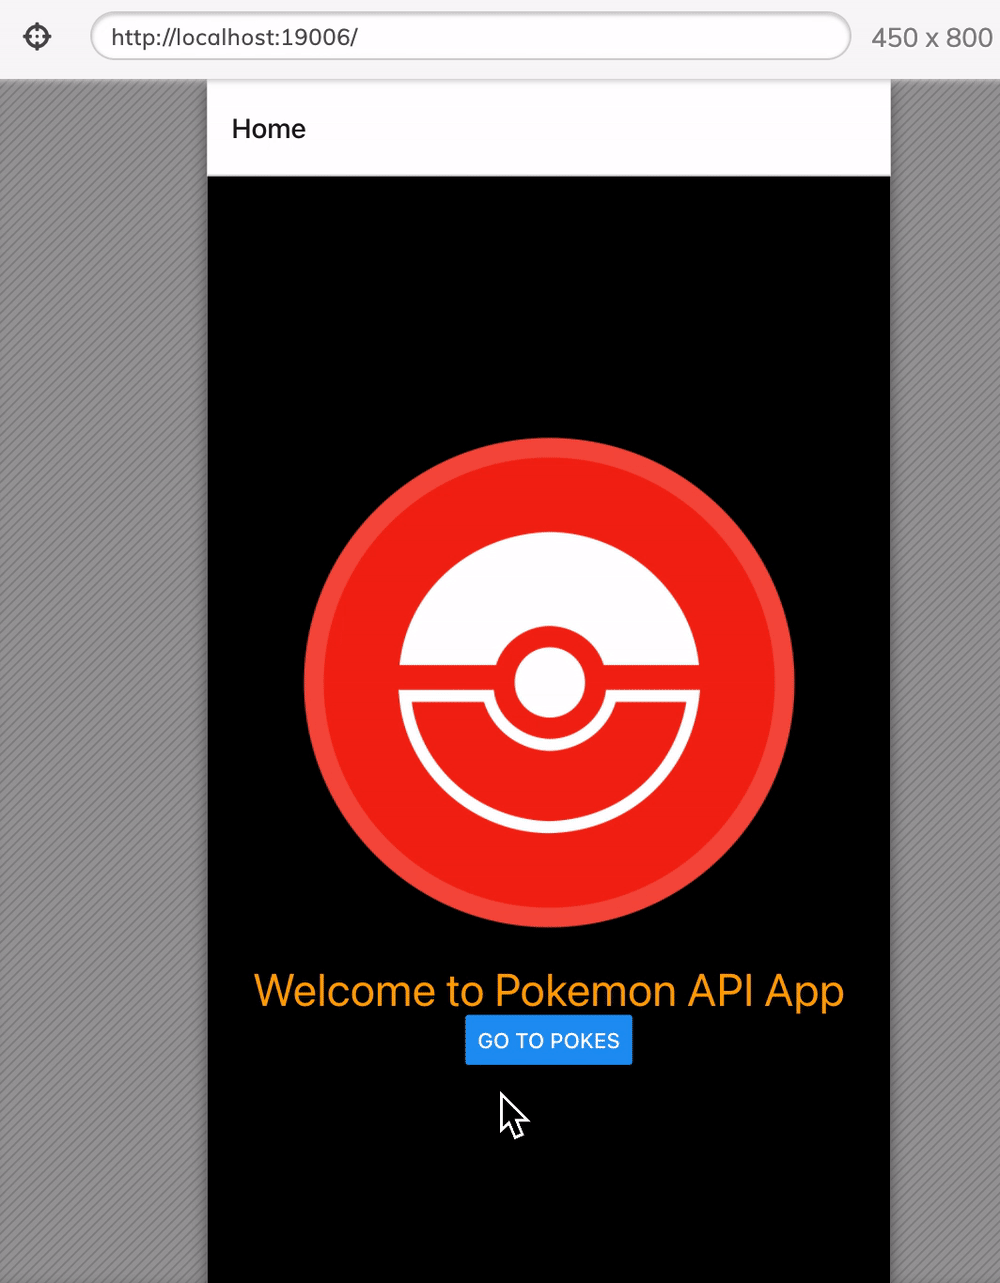 The user is navigating through the Pokemon RN application